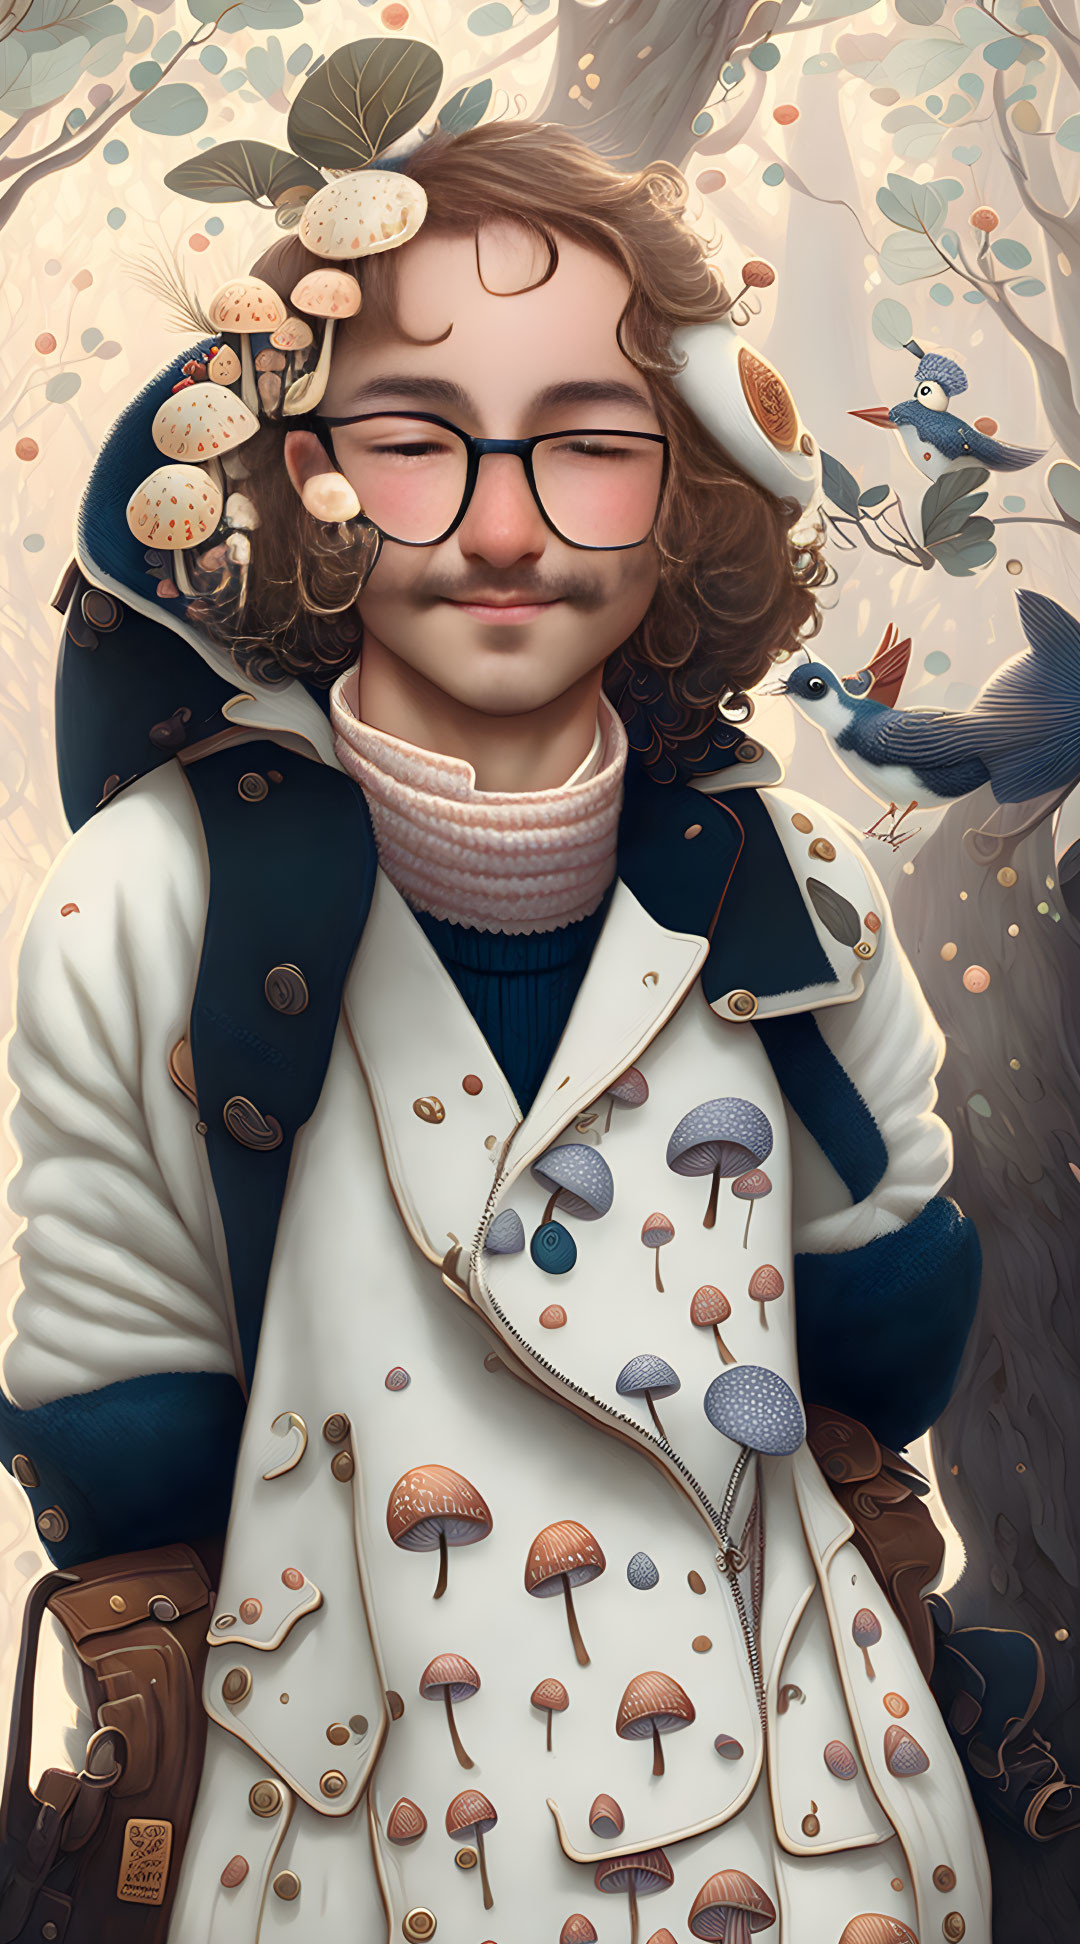 Illustration of person with curly hair, glasses, mushroom coat, birds, butterflies in dreamy scene